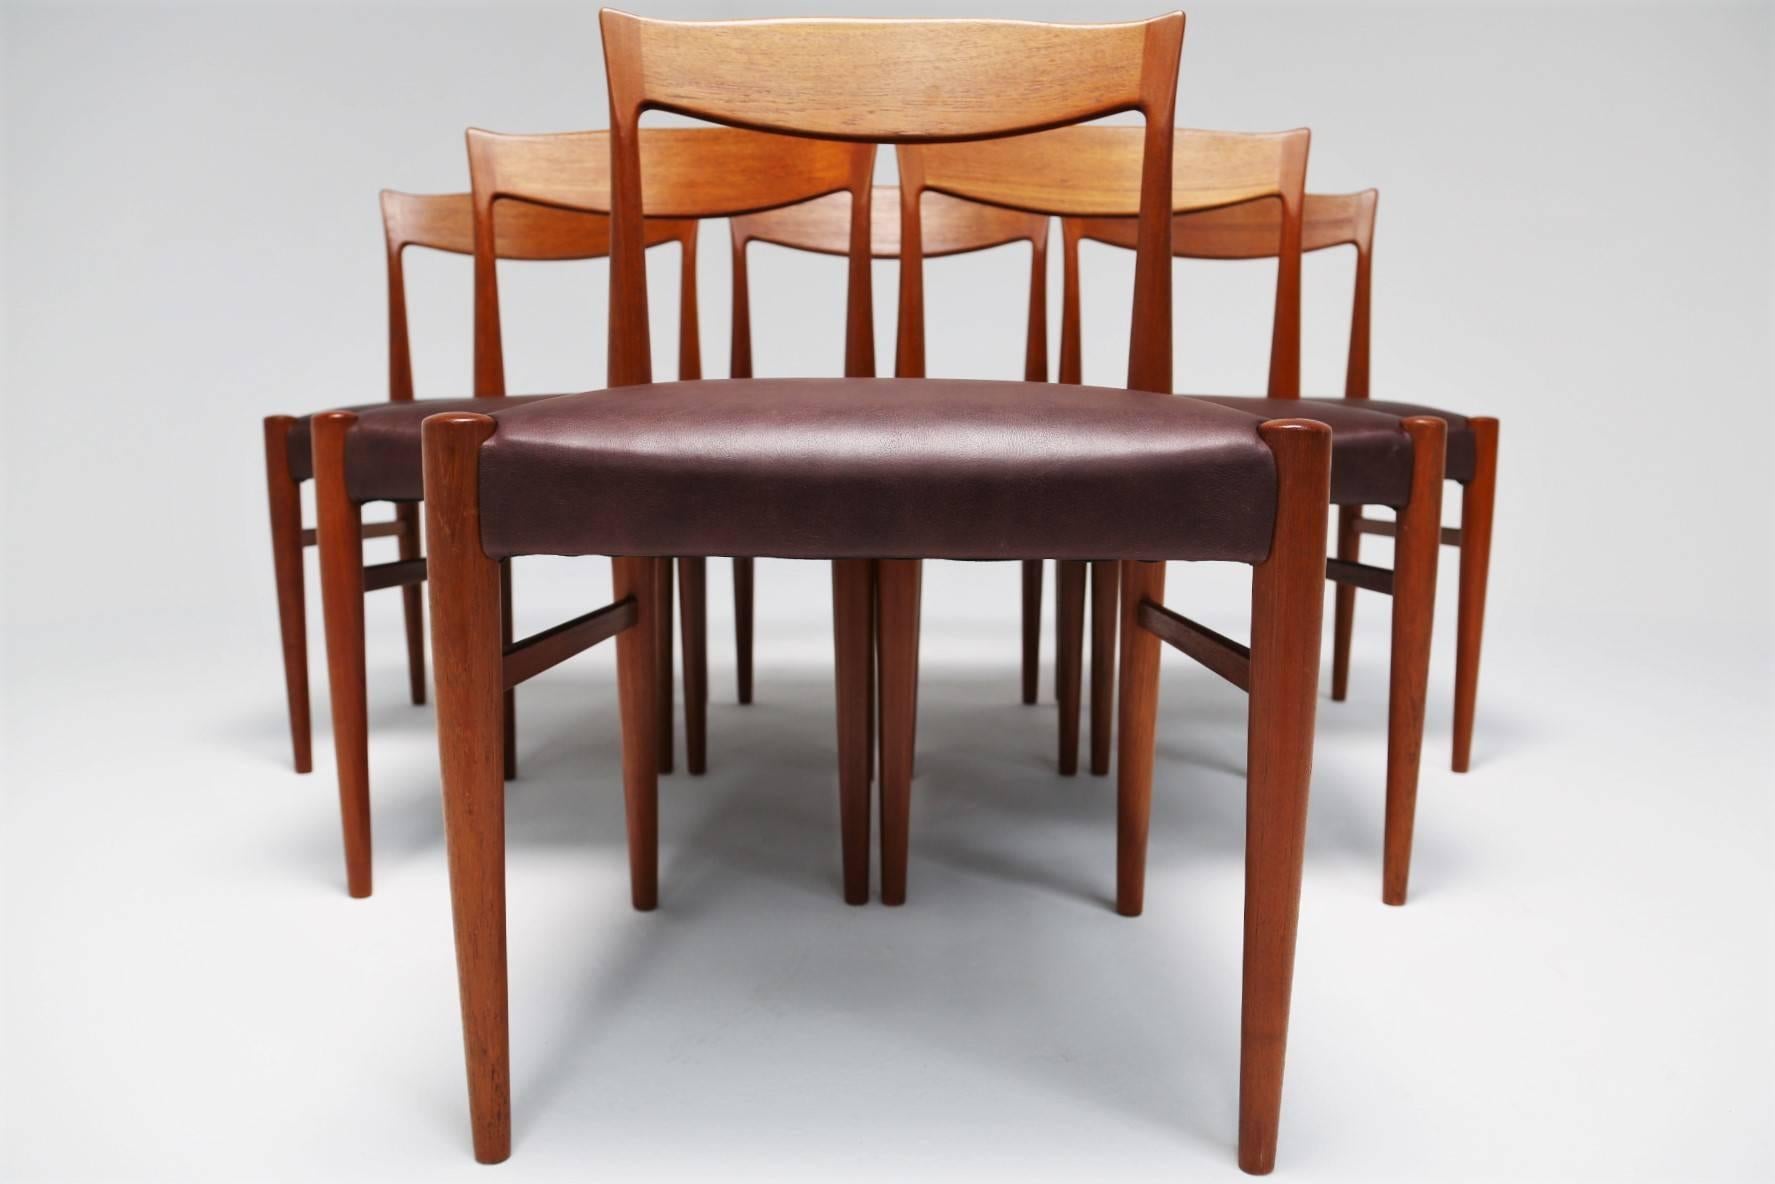 This rarely found set of vintage Danish dining chairs were made by Soro Stolefabrik in the 1960s. Crafted from solid teak which has a great tone and good clear grain throughout. Their design is typical of the Danish modern style in that they are